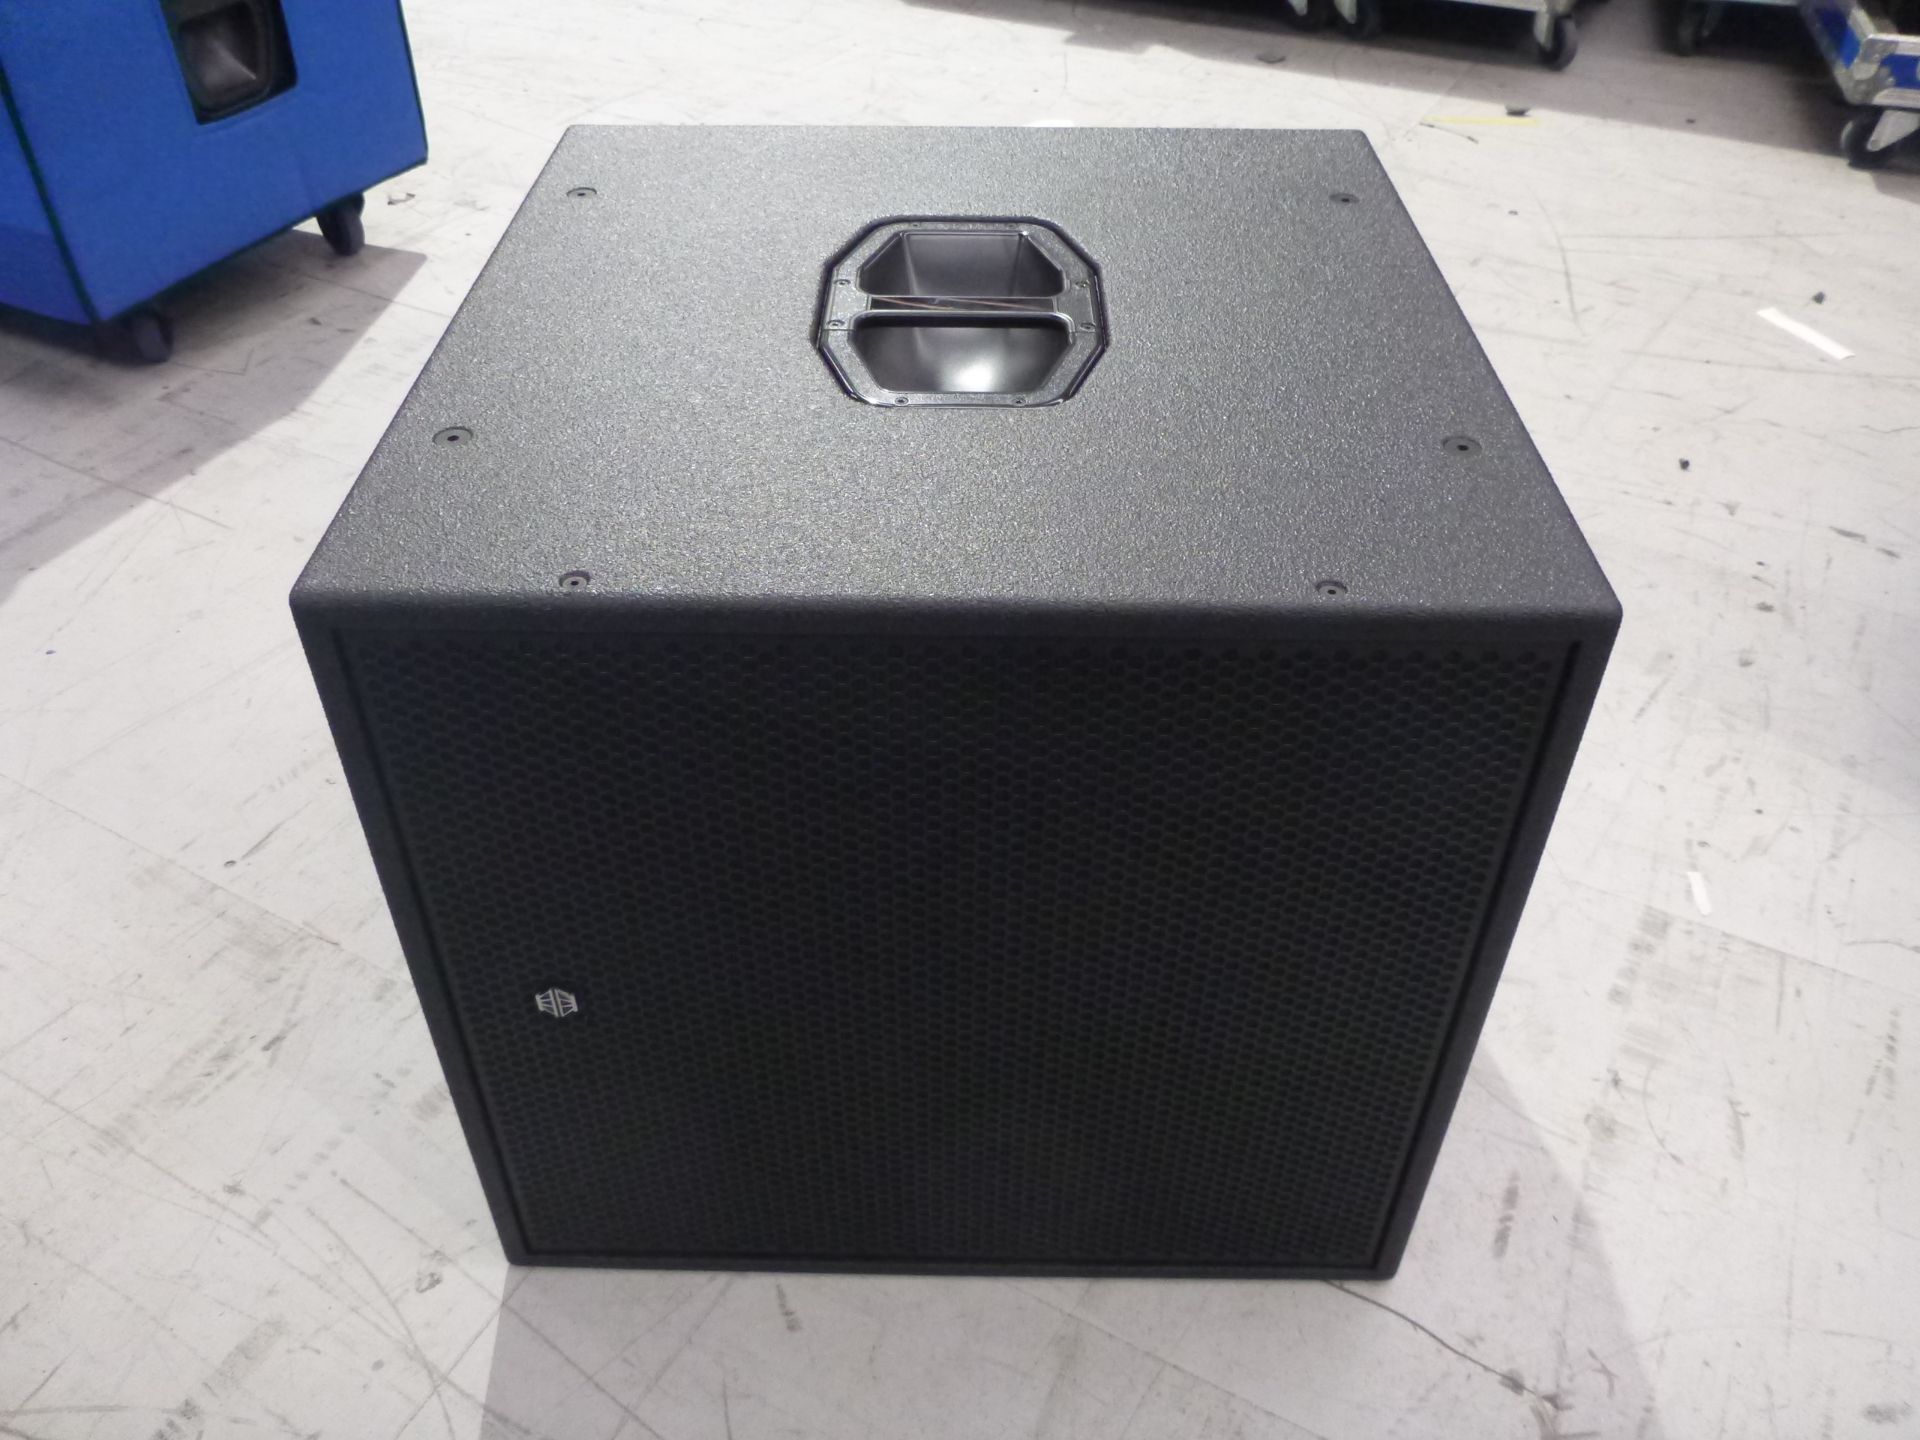 EM Acoustics S-18 Compact Reflex Subwoofer, Includes padded cover, S/N S180719/0005 - Image 2 of 5